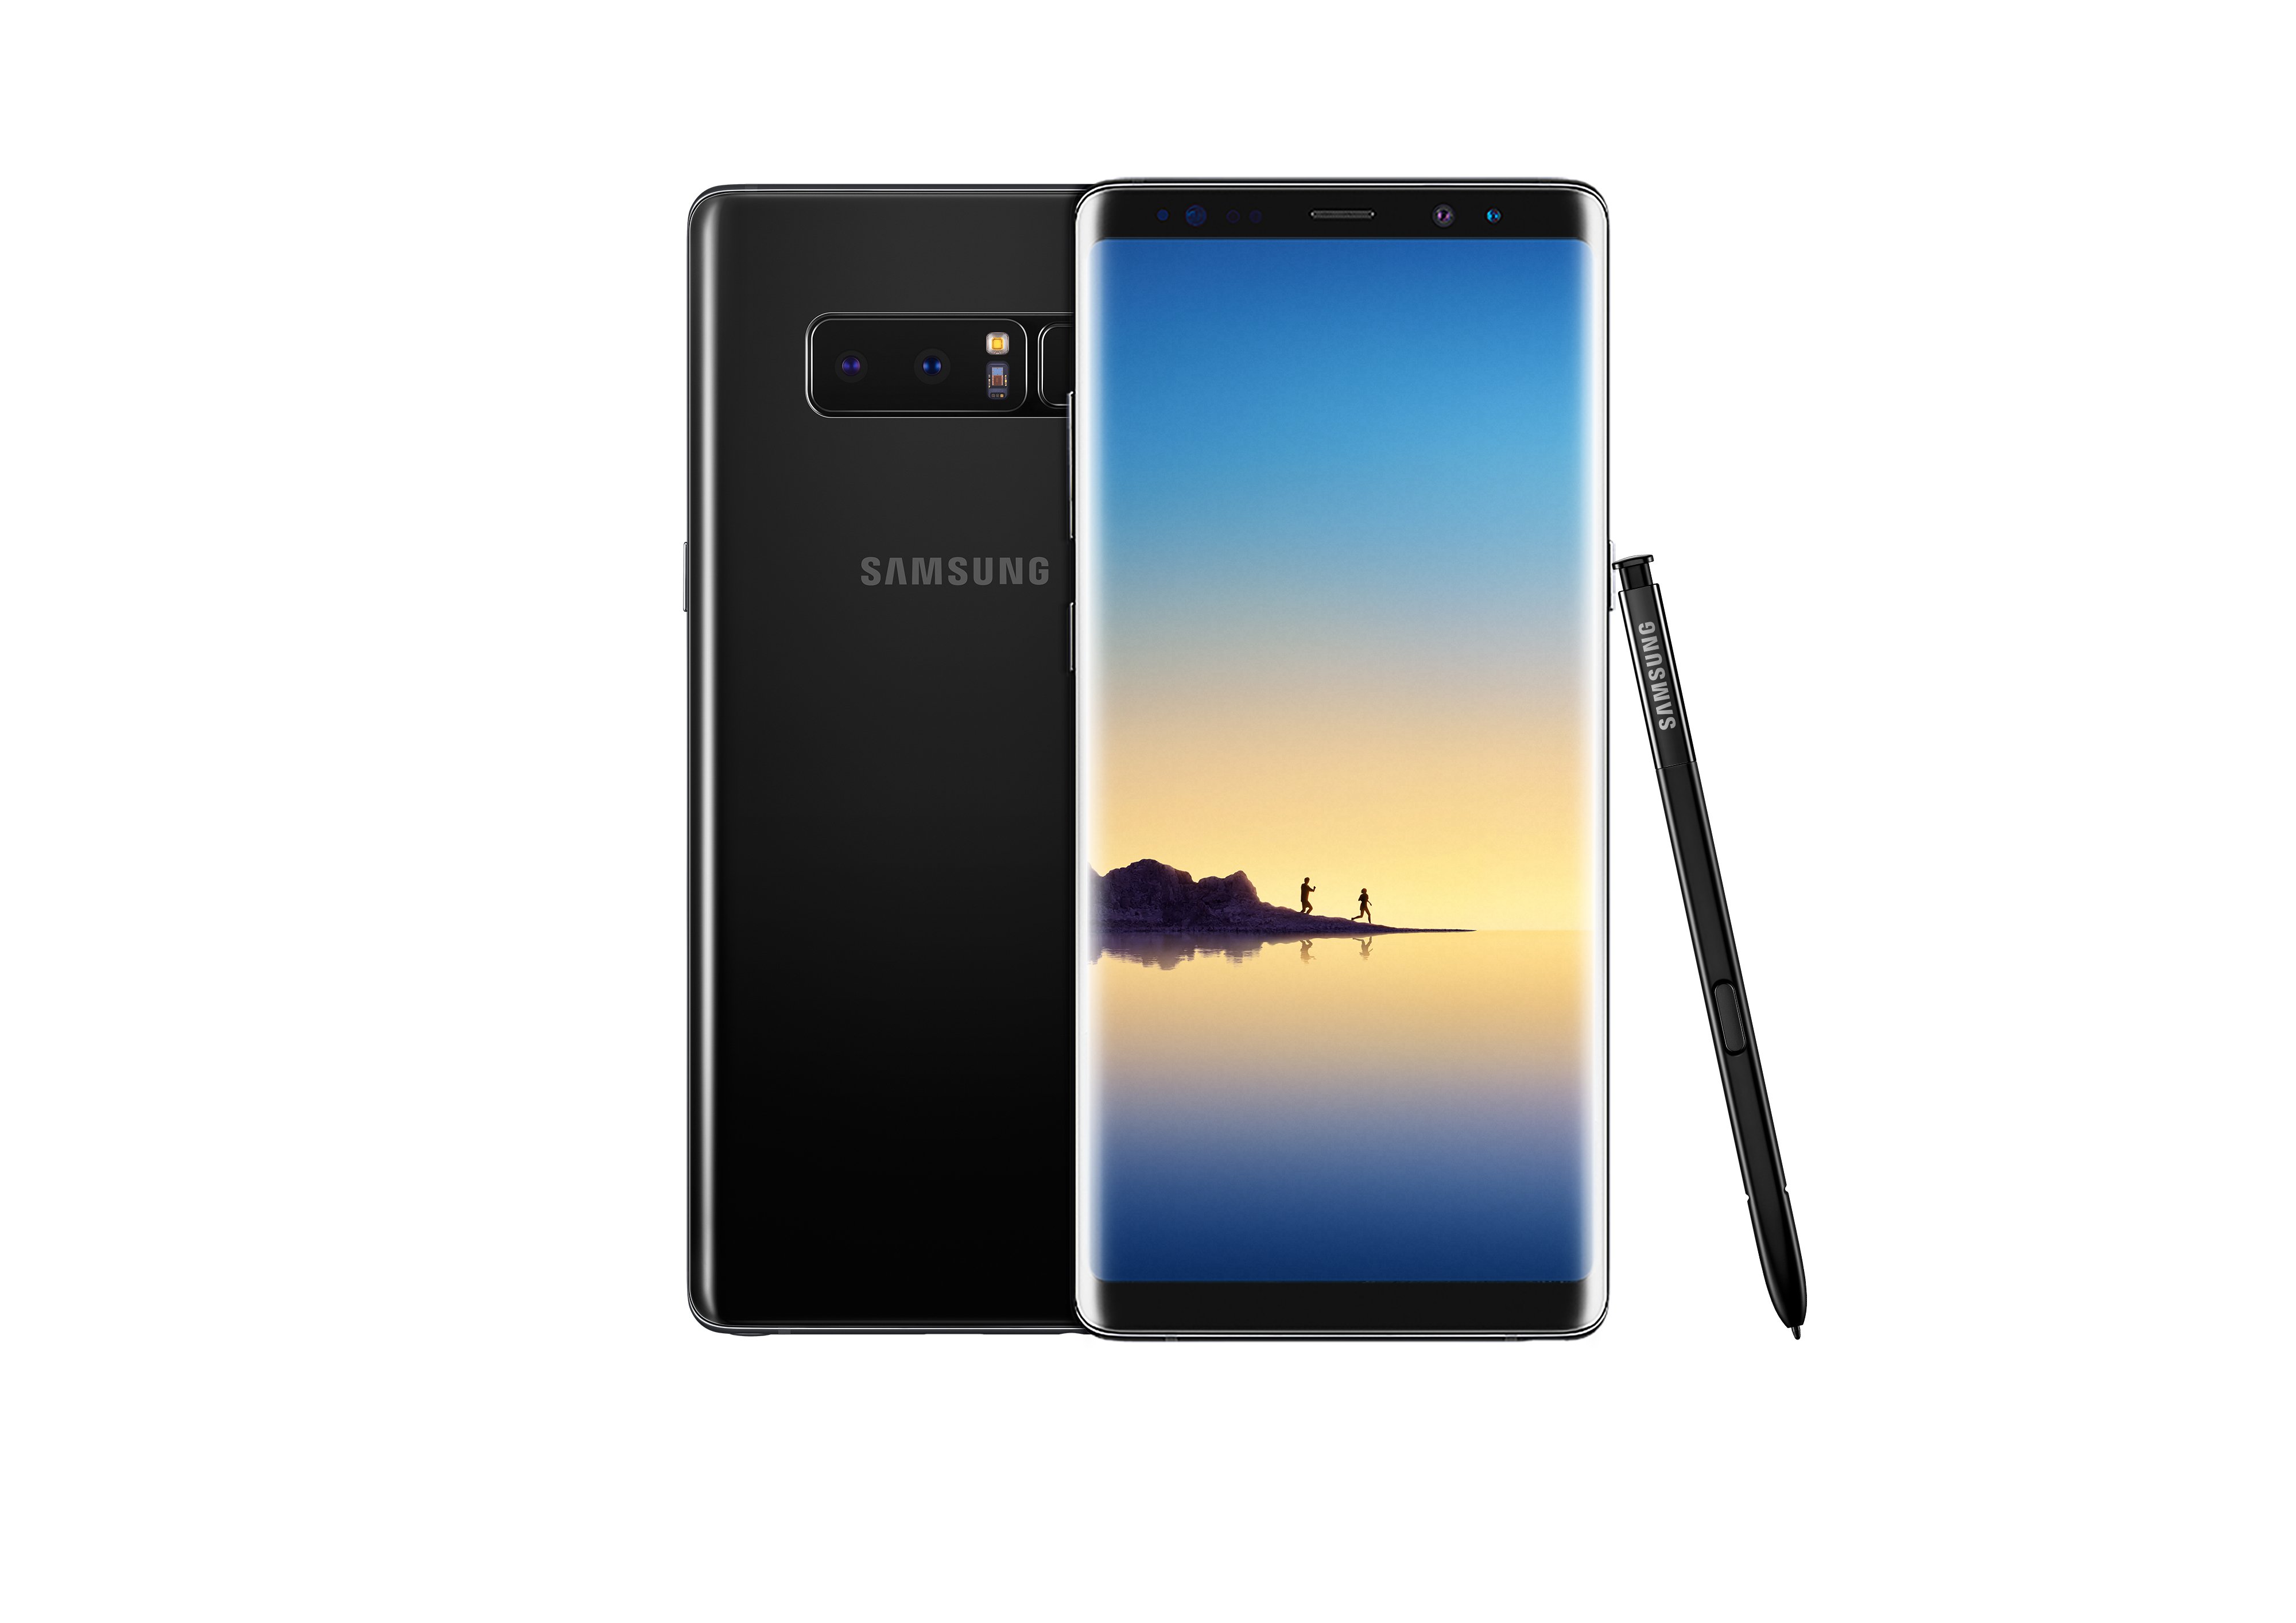 Galaxy Note8 Midnight Black Dual1 Samsung Galaxy Note 8 Pre Orders Highest Of Note Series